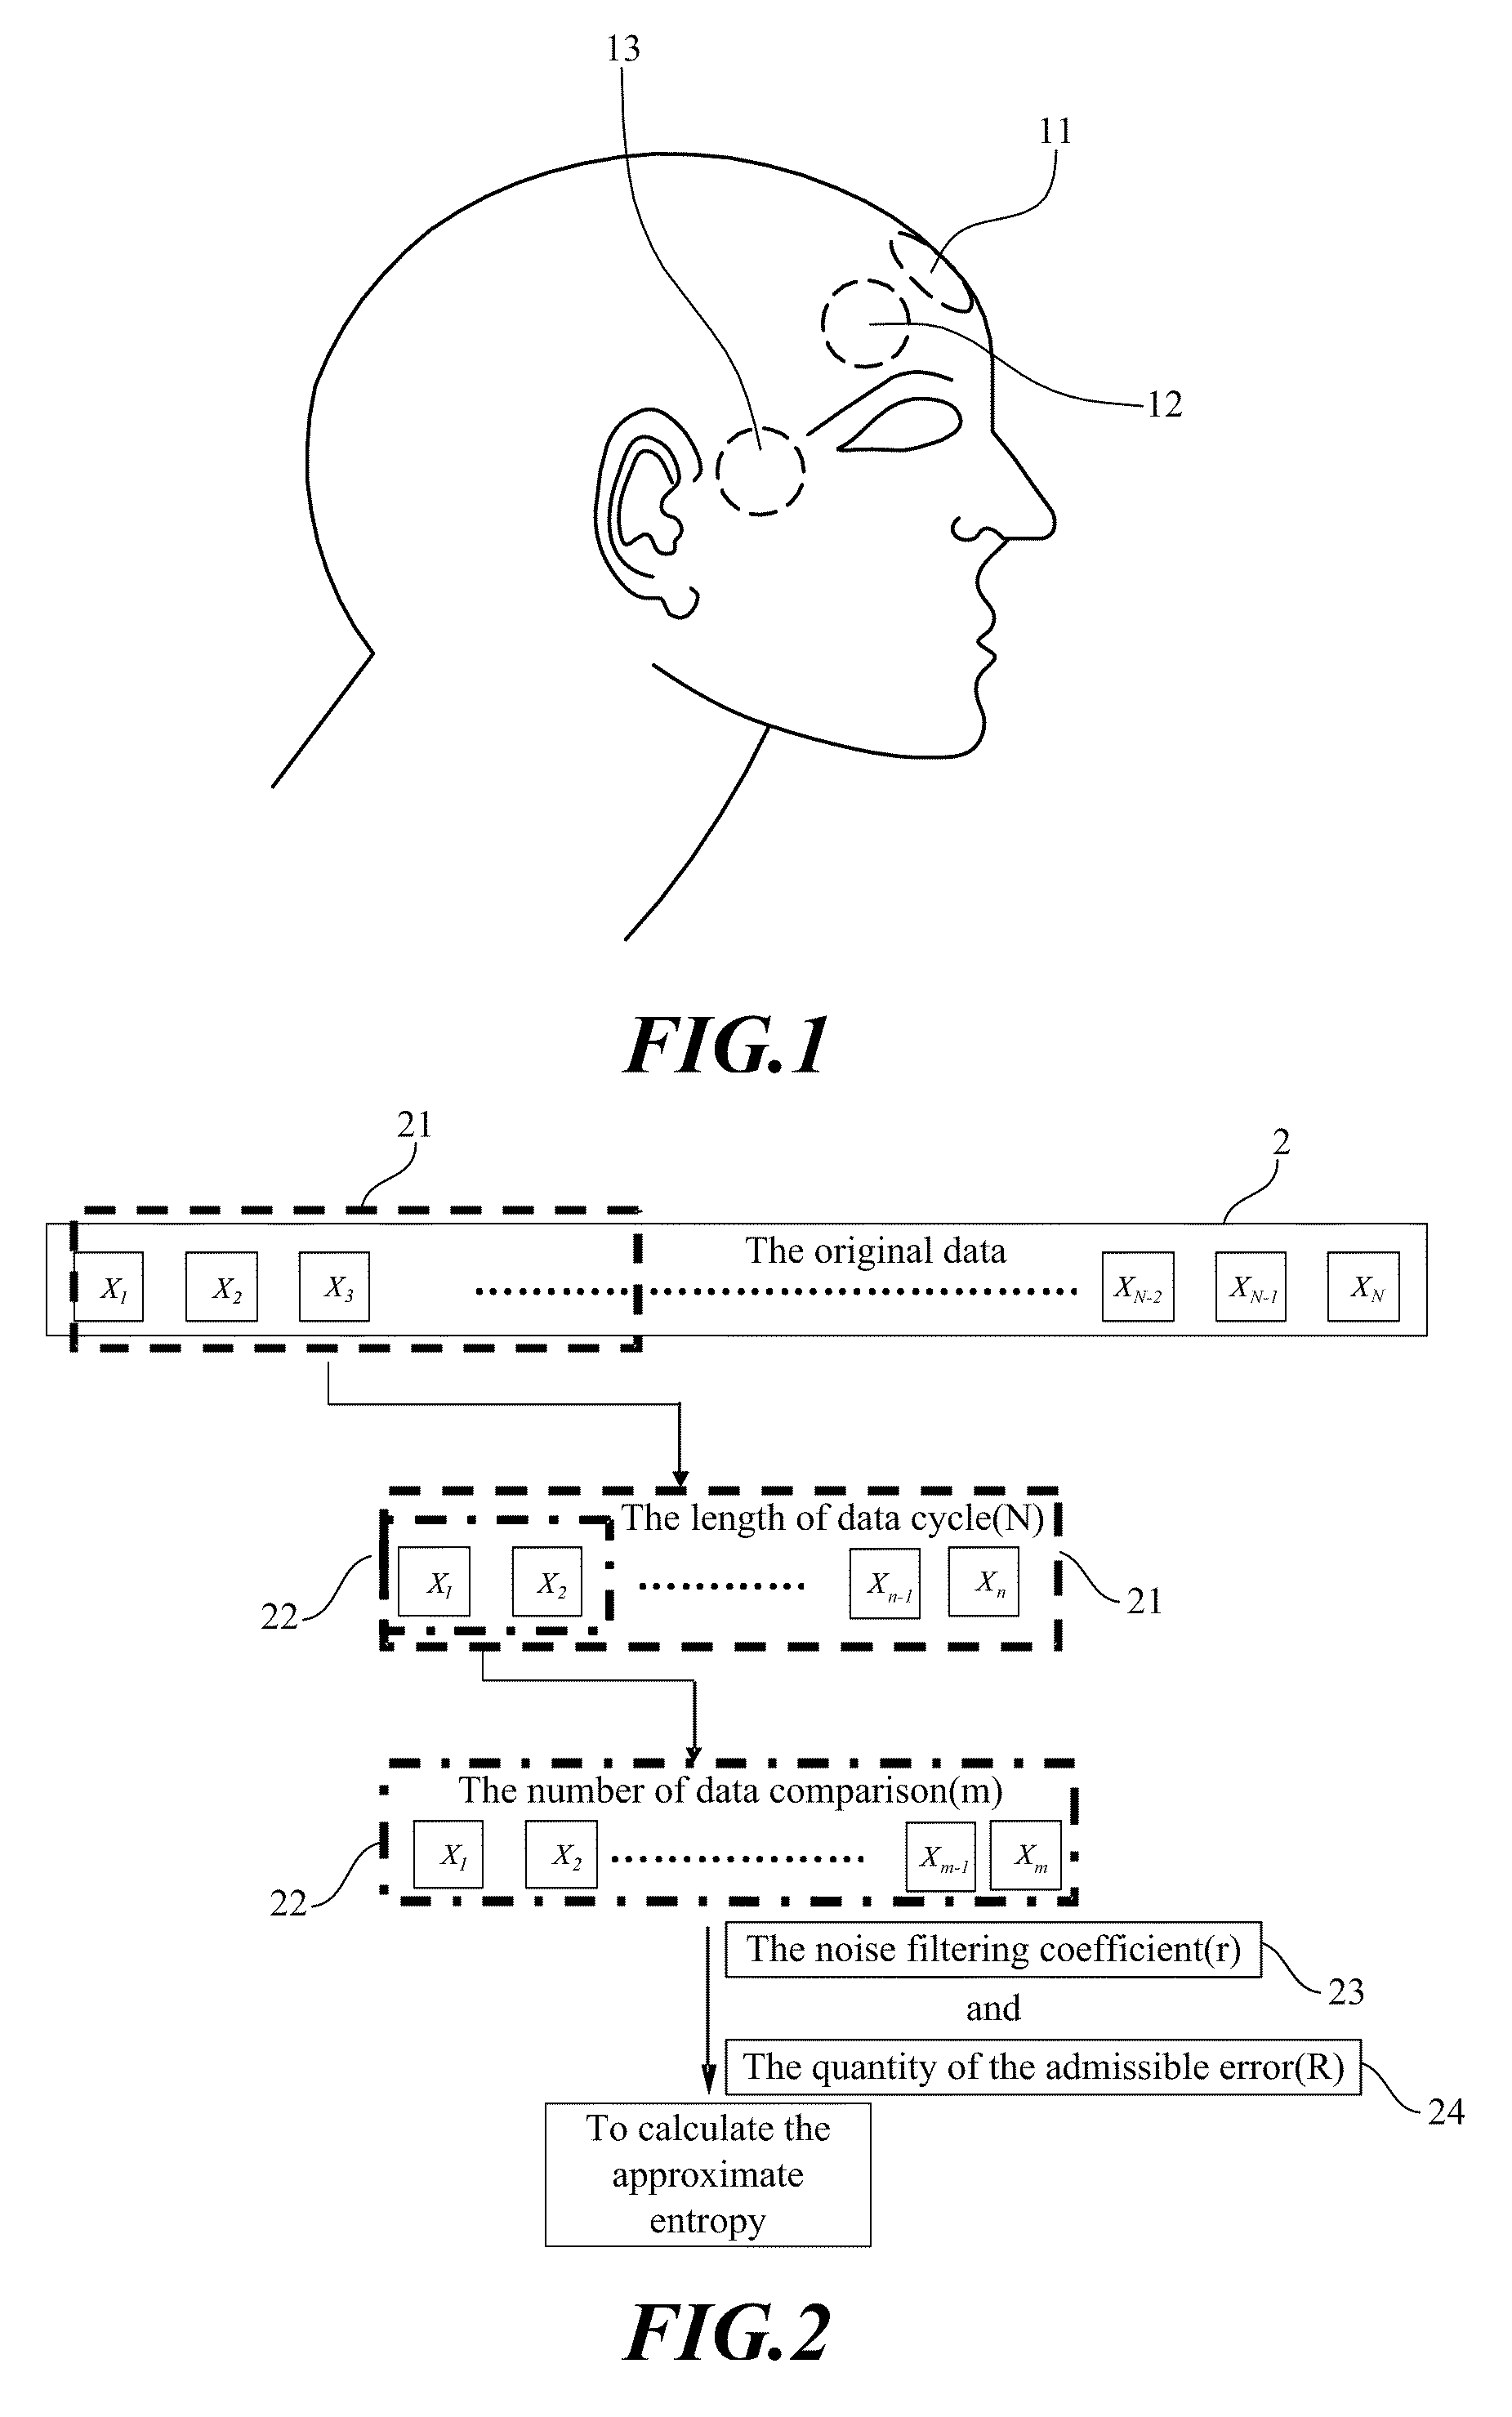 Method for Monitoring the Depth of Anesthesia